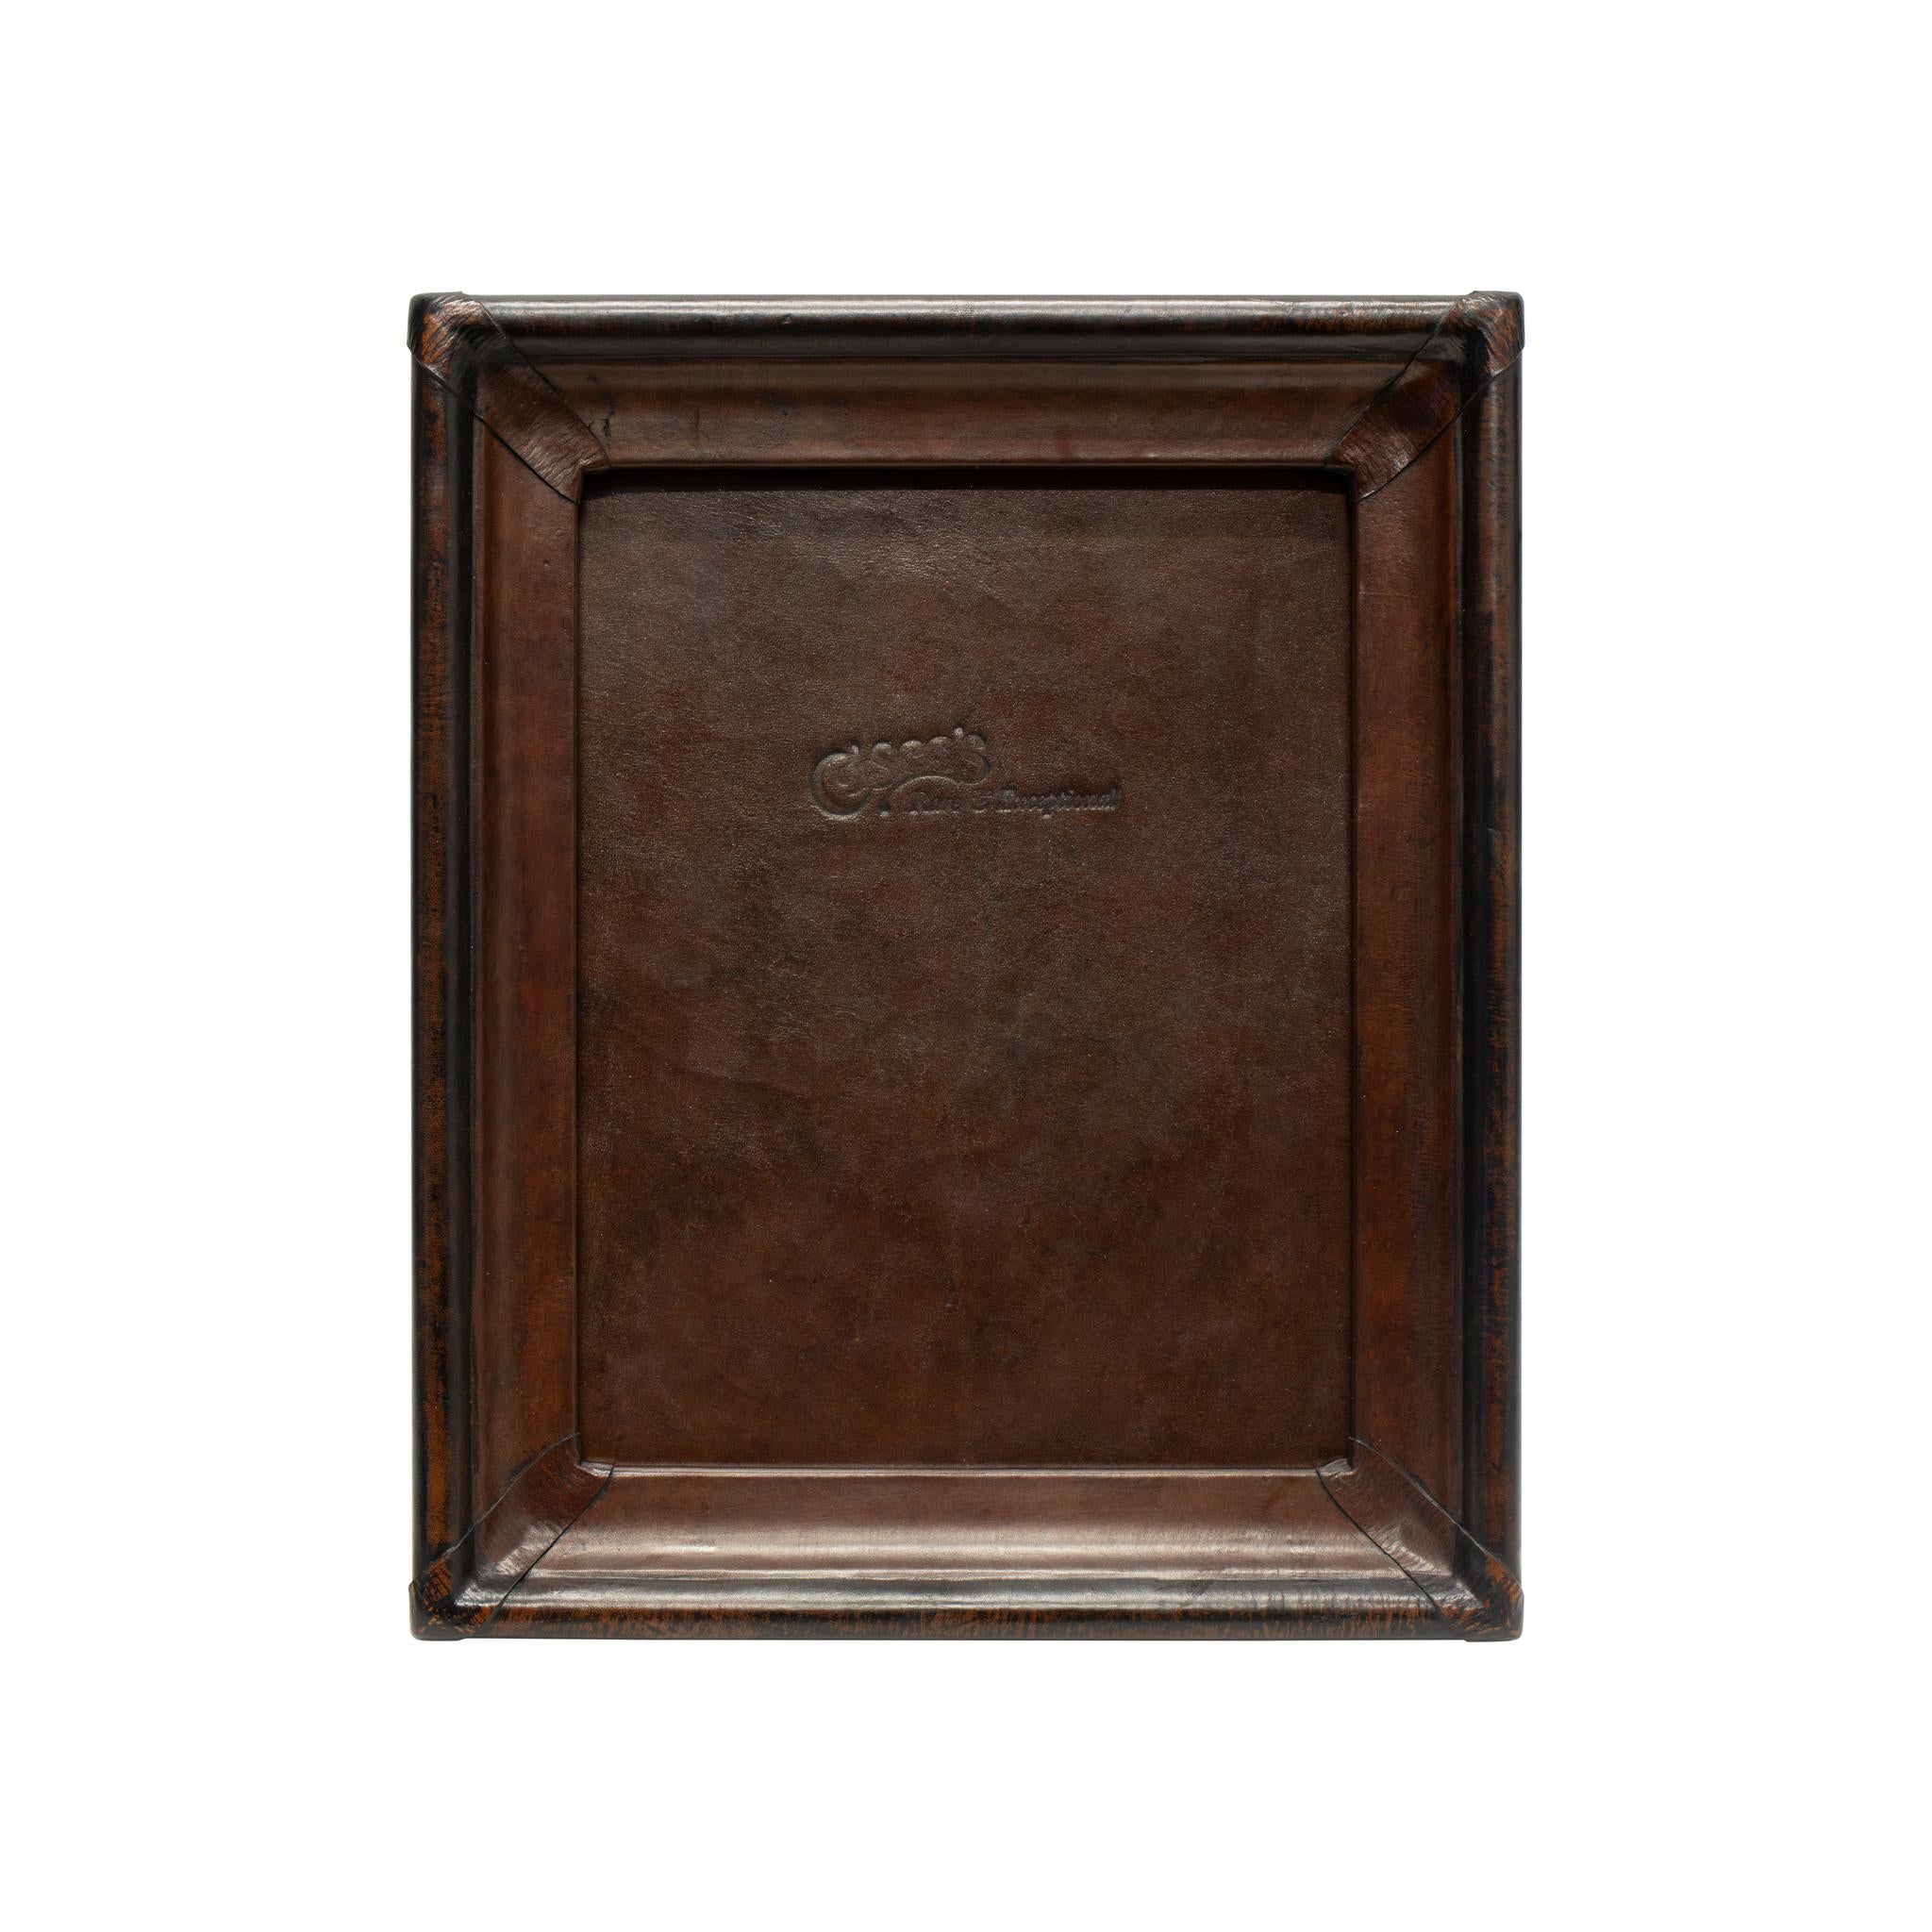 8x10 dark brown & black leather tabletop picture frame. Cisco's premium leather picture frames add the perfect accent to any home or office. Each frame is skillfully crafted by artisan saddle makers using genuine cowhide. Color: Dark brown with